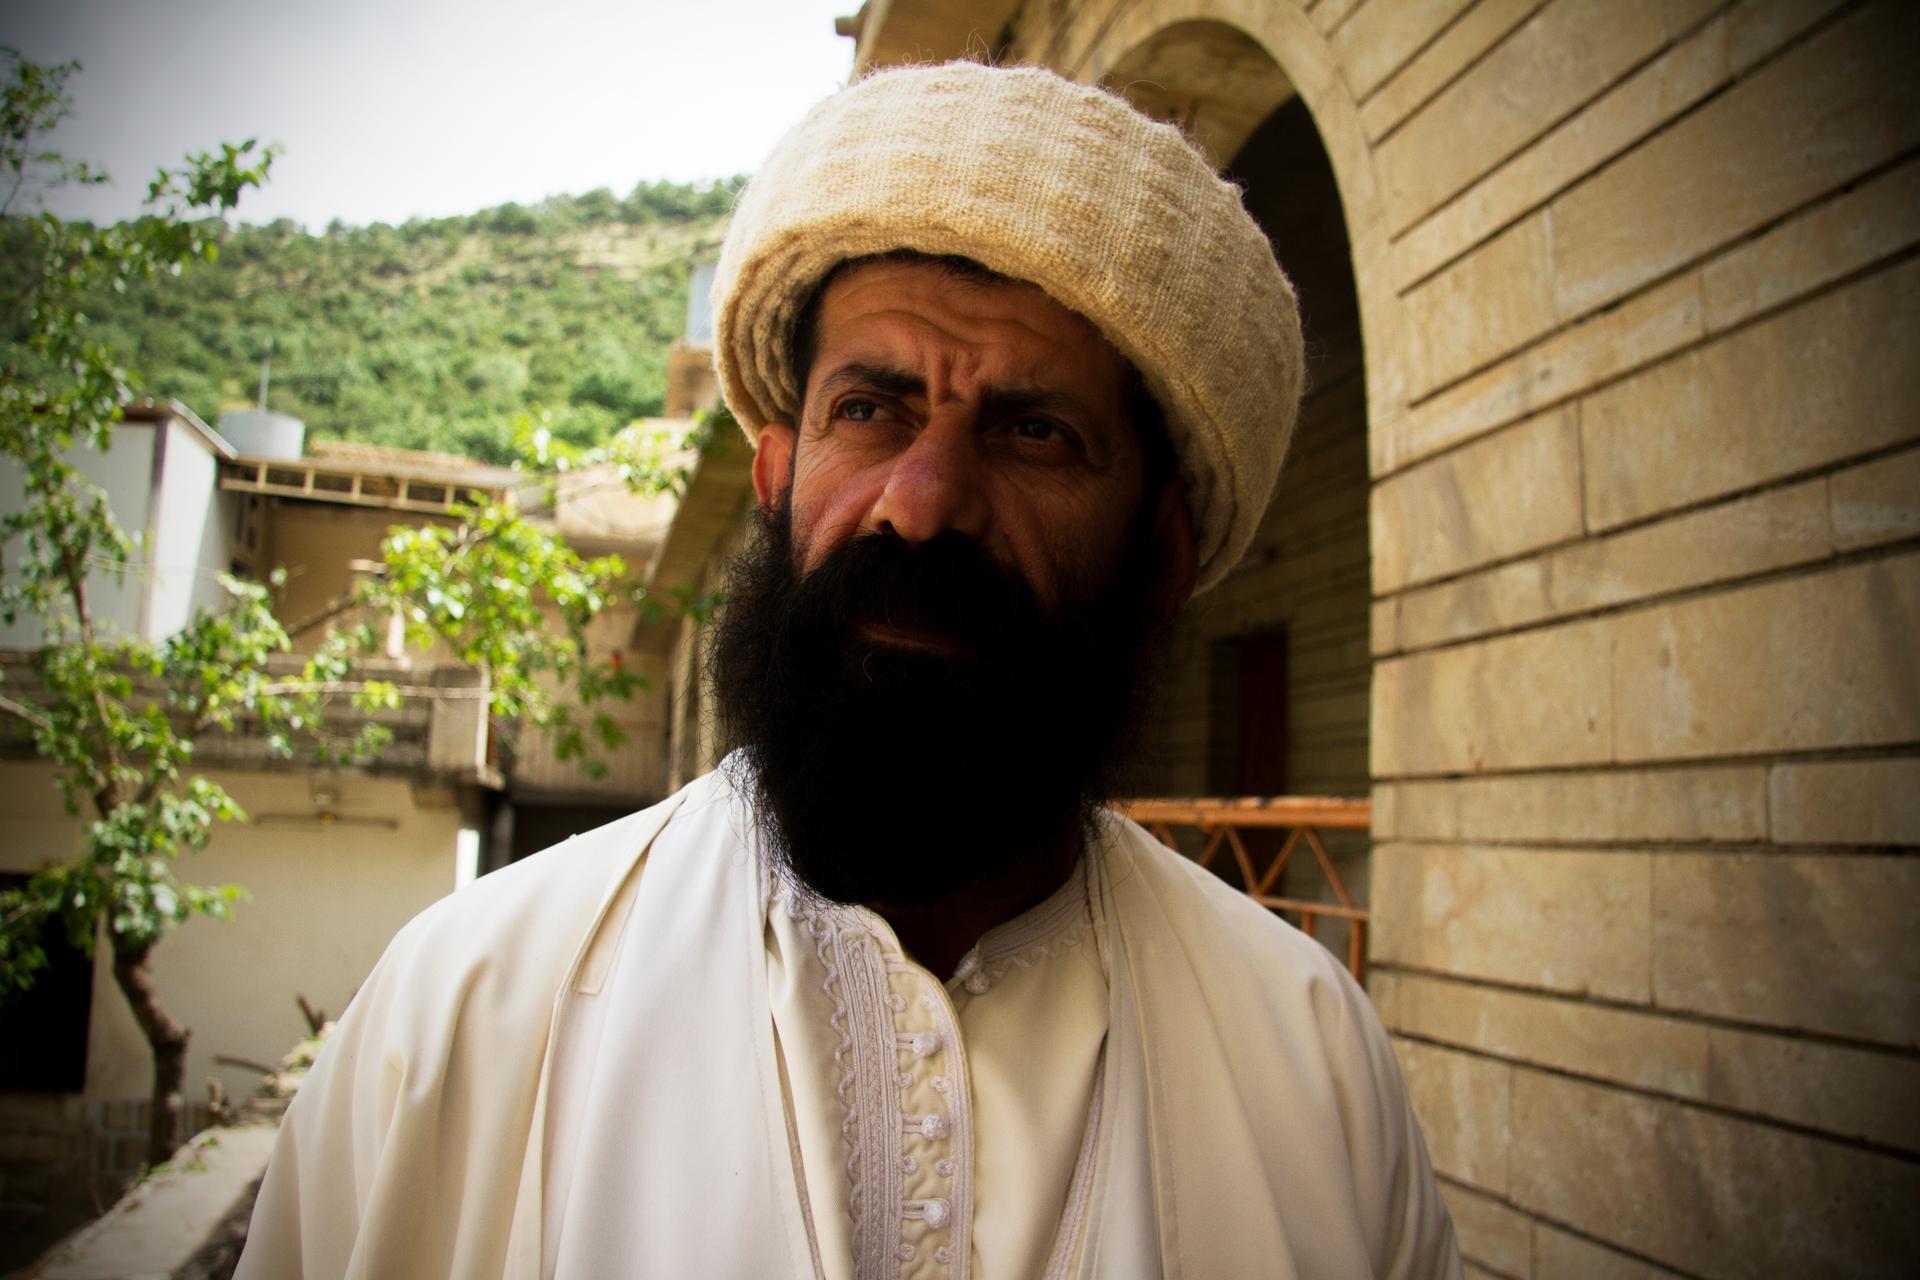 Baba Chawish, a Yezidi spiritual leader at Lalish temple, explains that before the Islamic State crisis, women who had been raped or forced to convert were traditionally cast out of Yezidi society. But now they can still be purified and baptized.